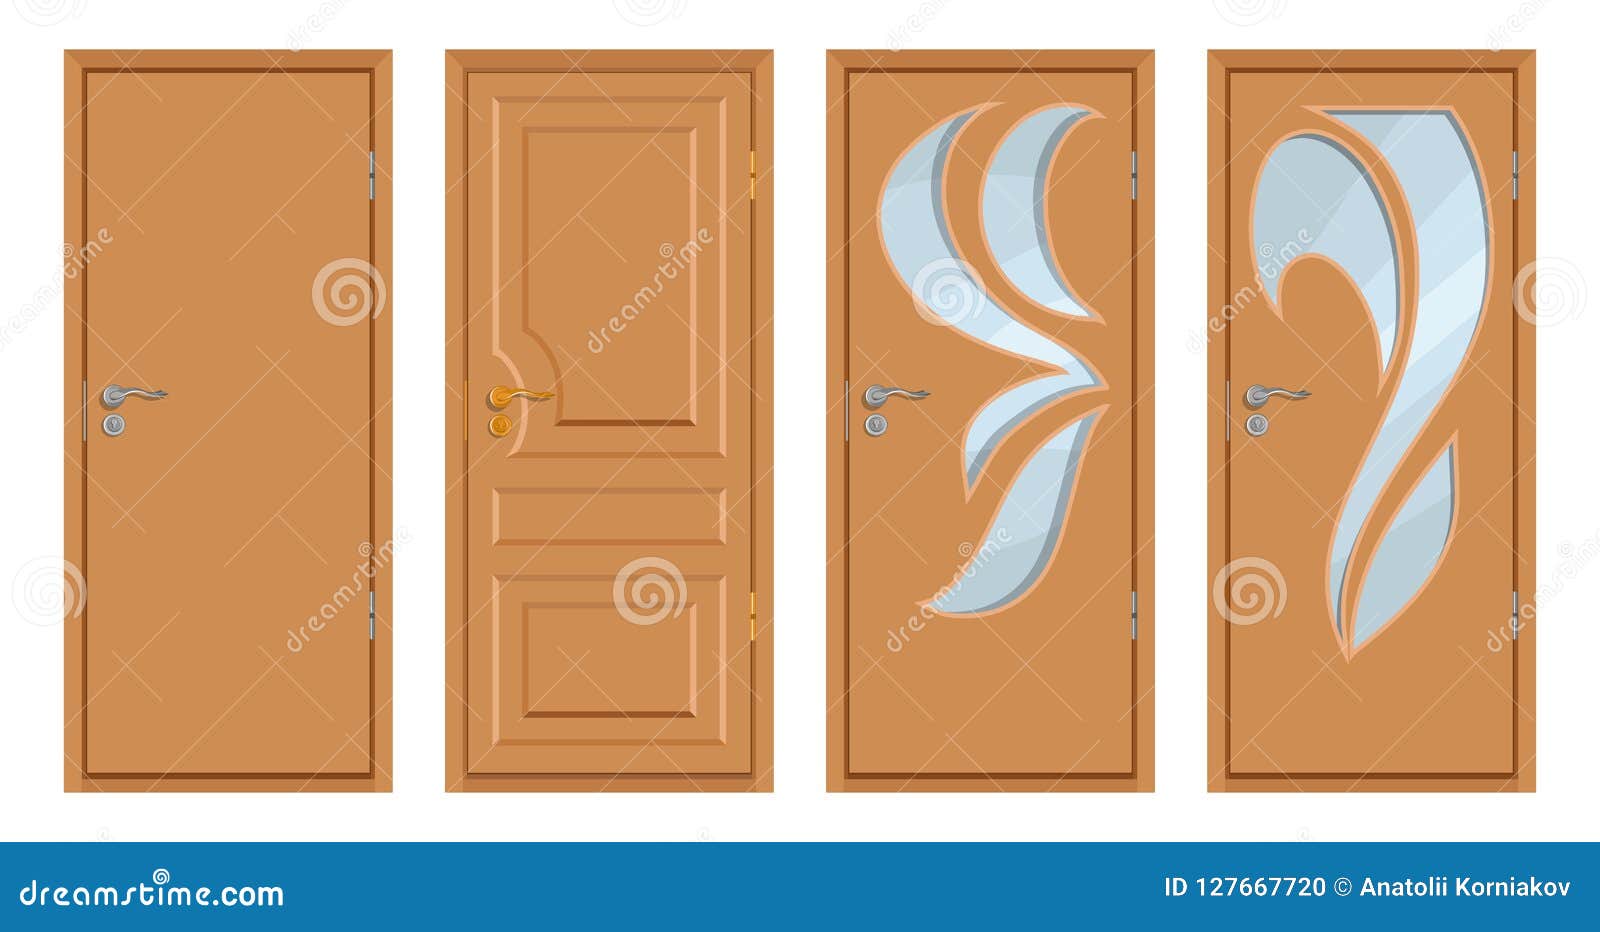 Colored Wooden Doors Isolated on White Background, Realistic ...